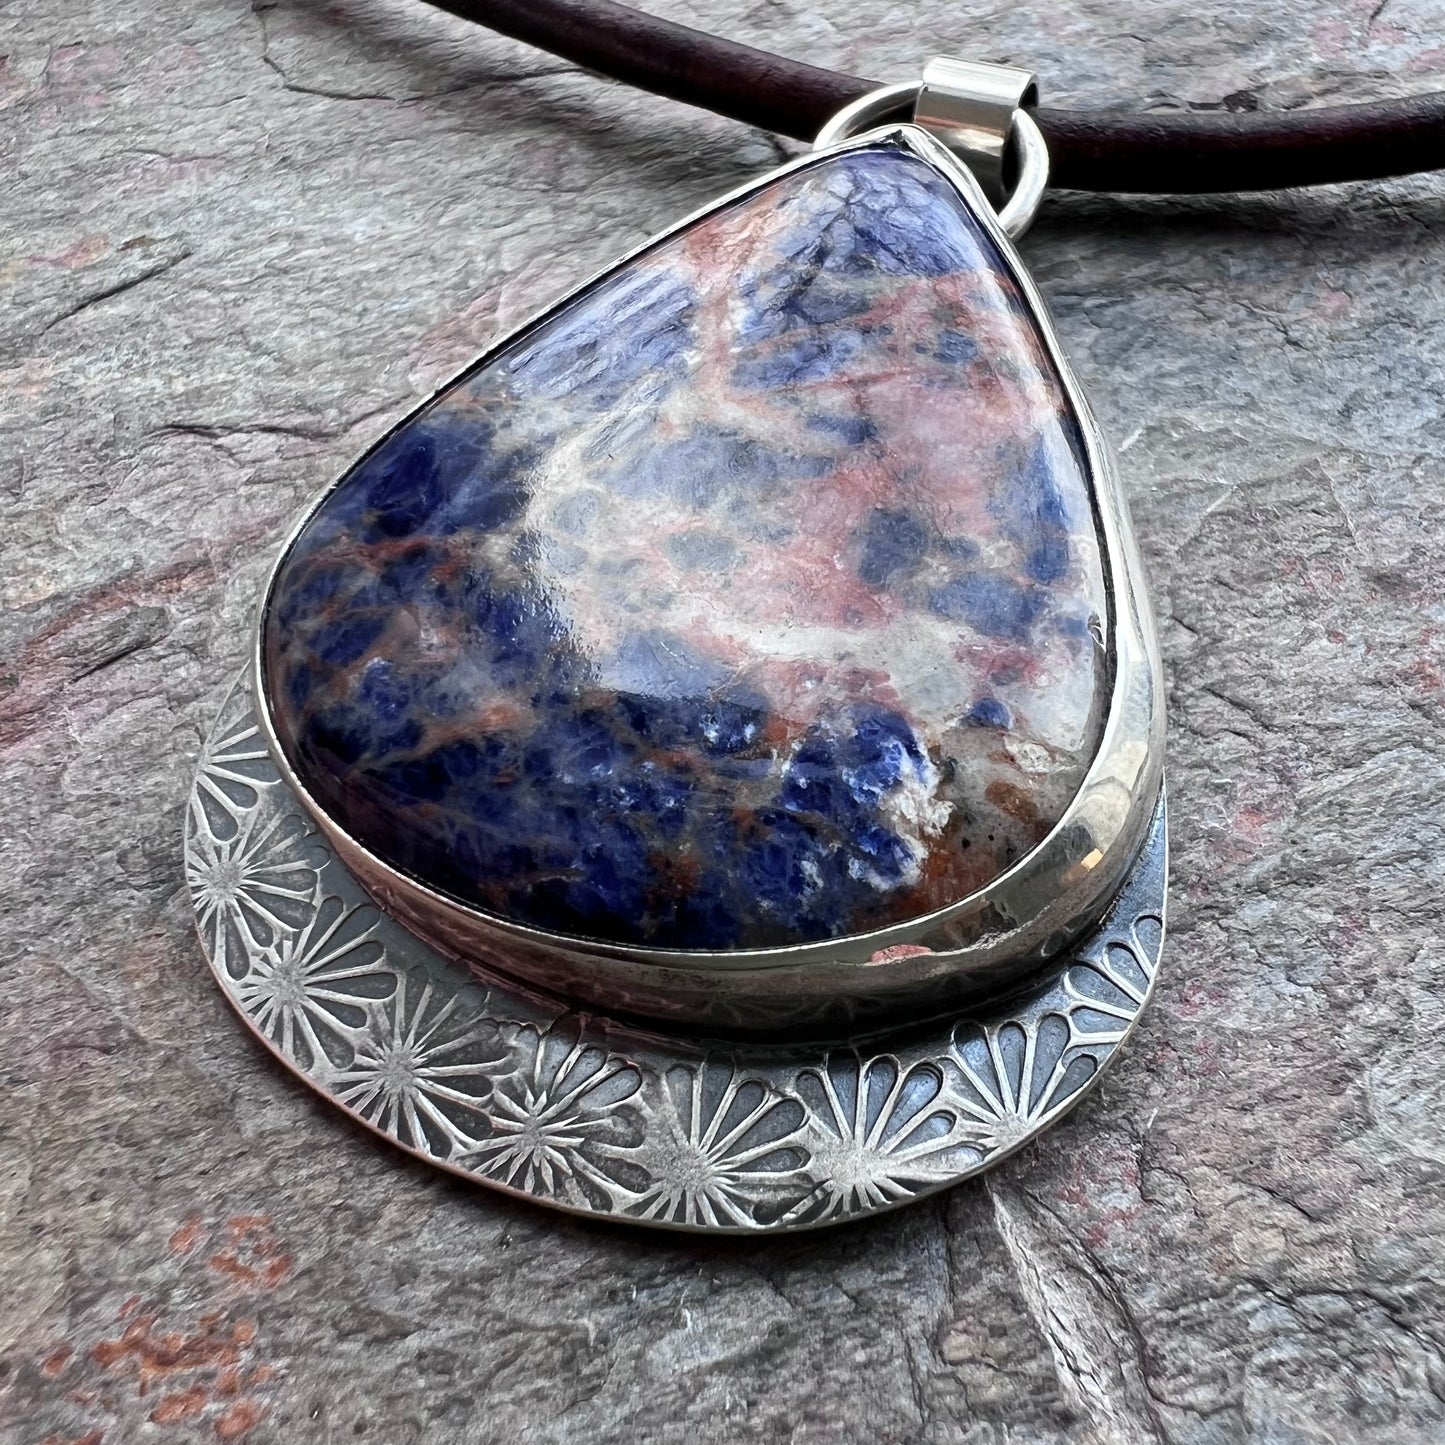 Large Sodalite and Sterling Silver Pendant Necklace - Handmade One-of-a-Kind Teardrop Pendant on Genuine Leather